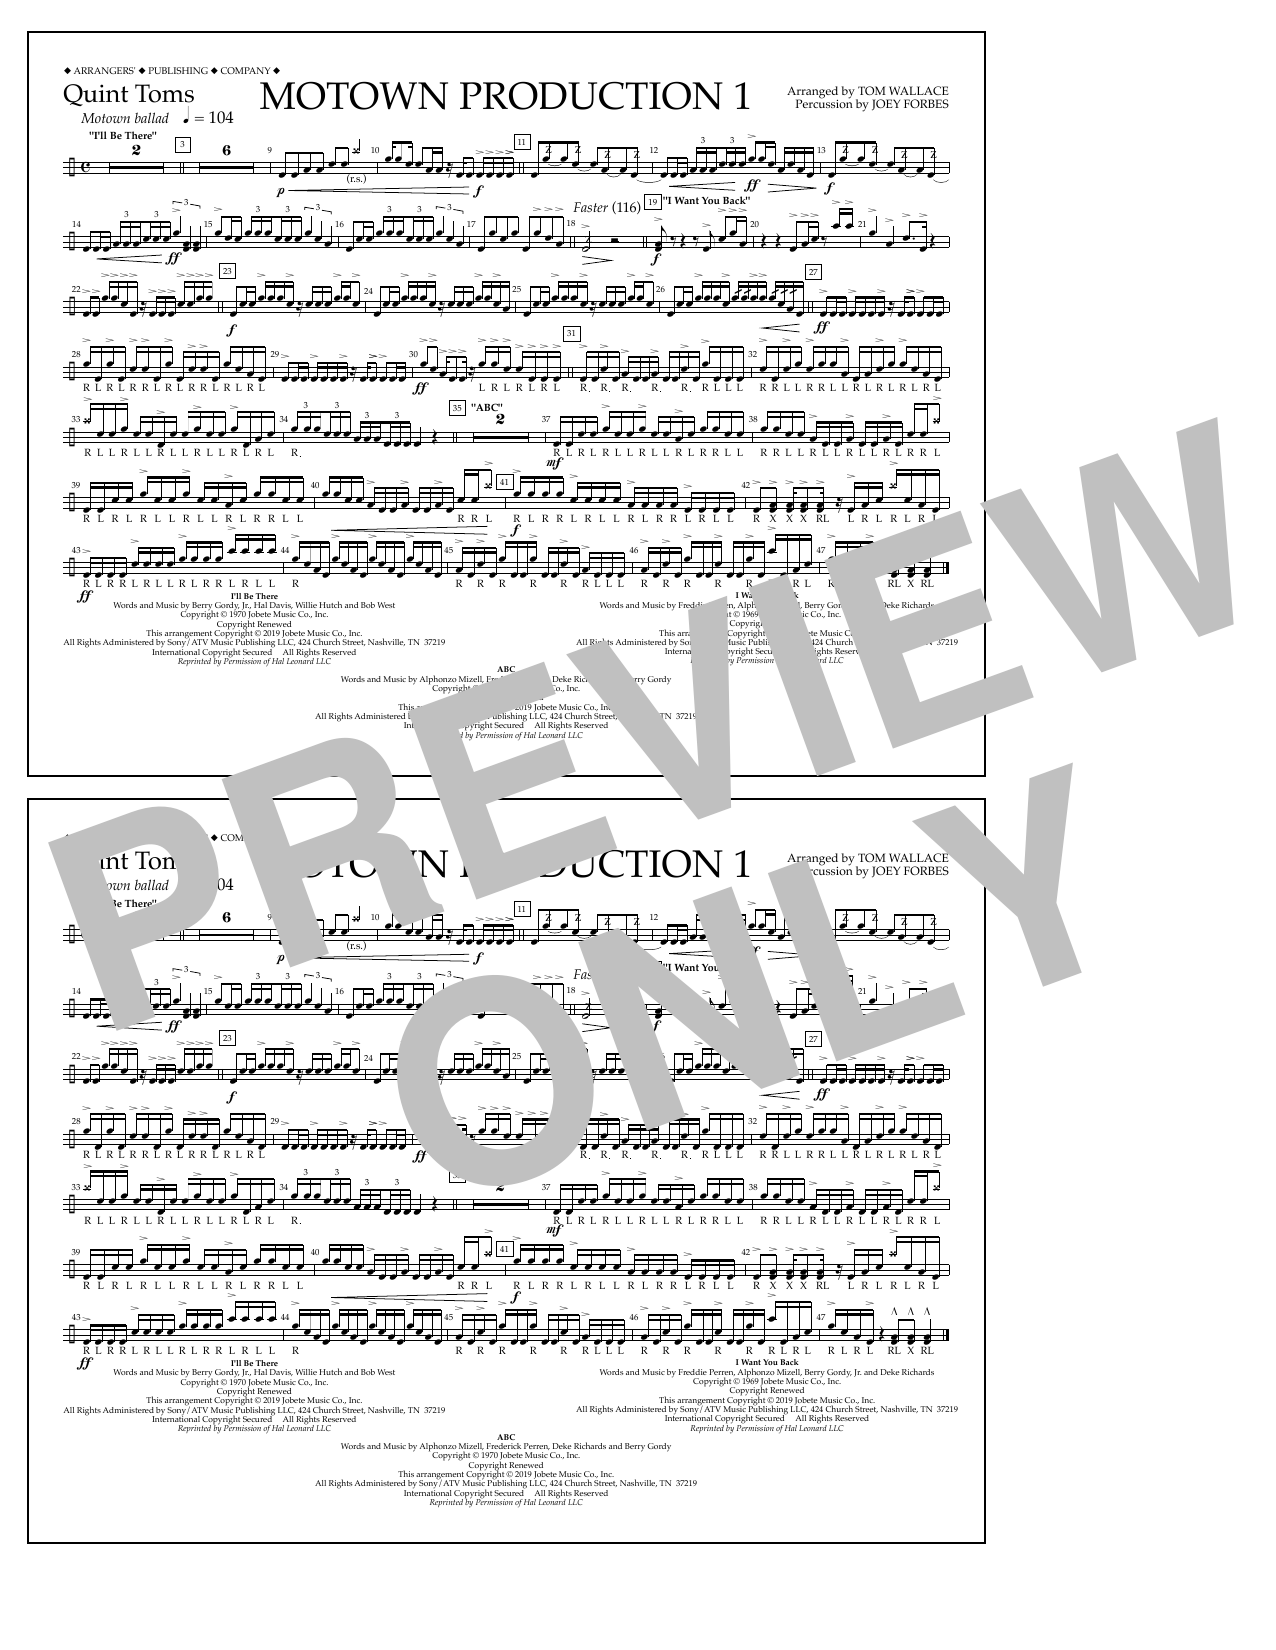 Download Jackson 5 Motown Production 1(arr. Tom Wallace) - Sheet Music